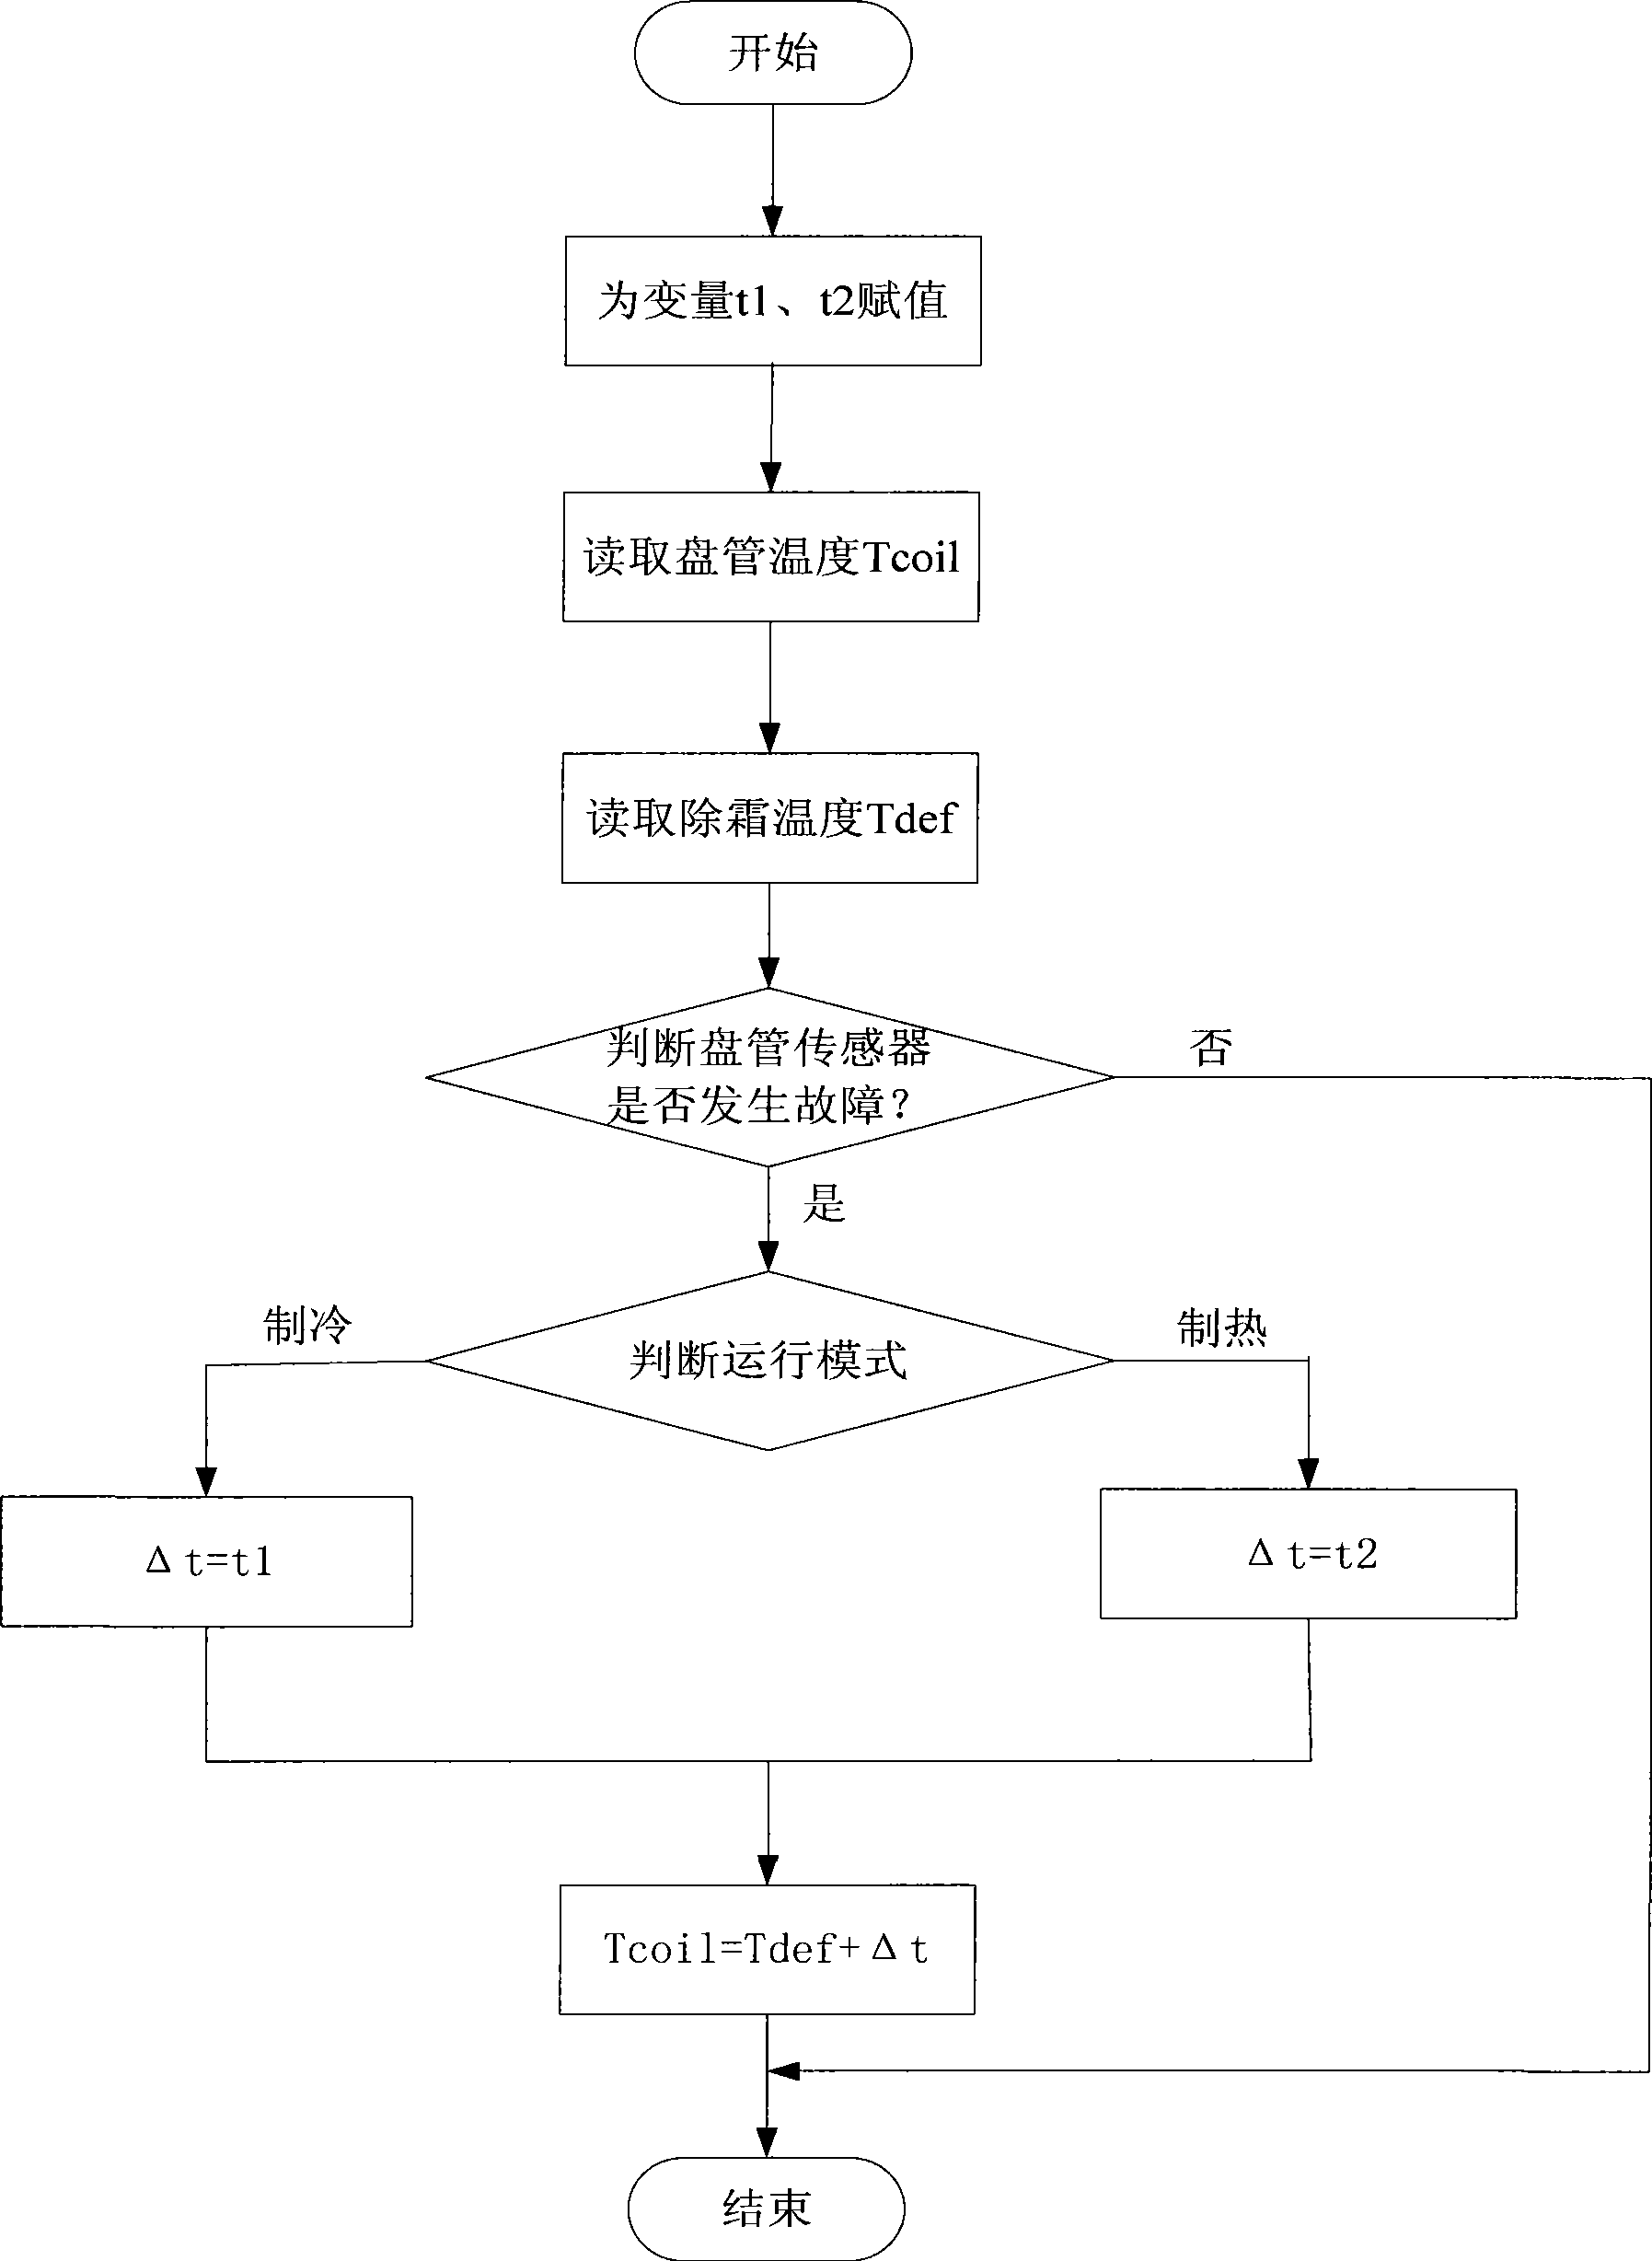 Substitution control method for air conditioner fault sensor